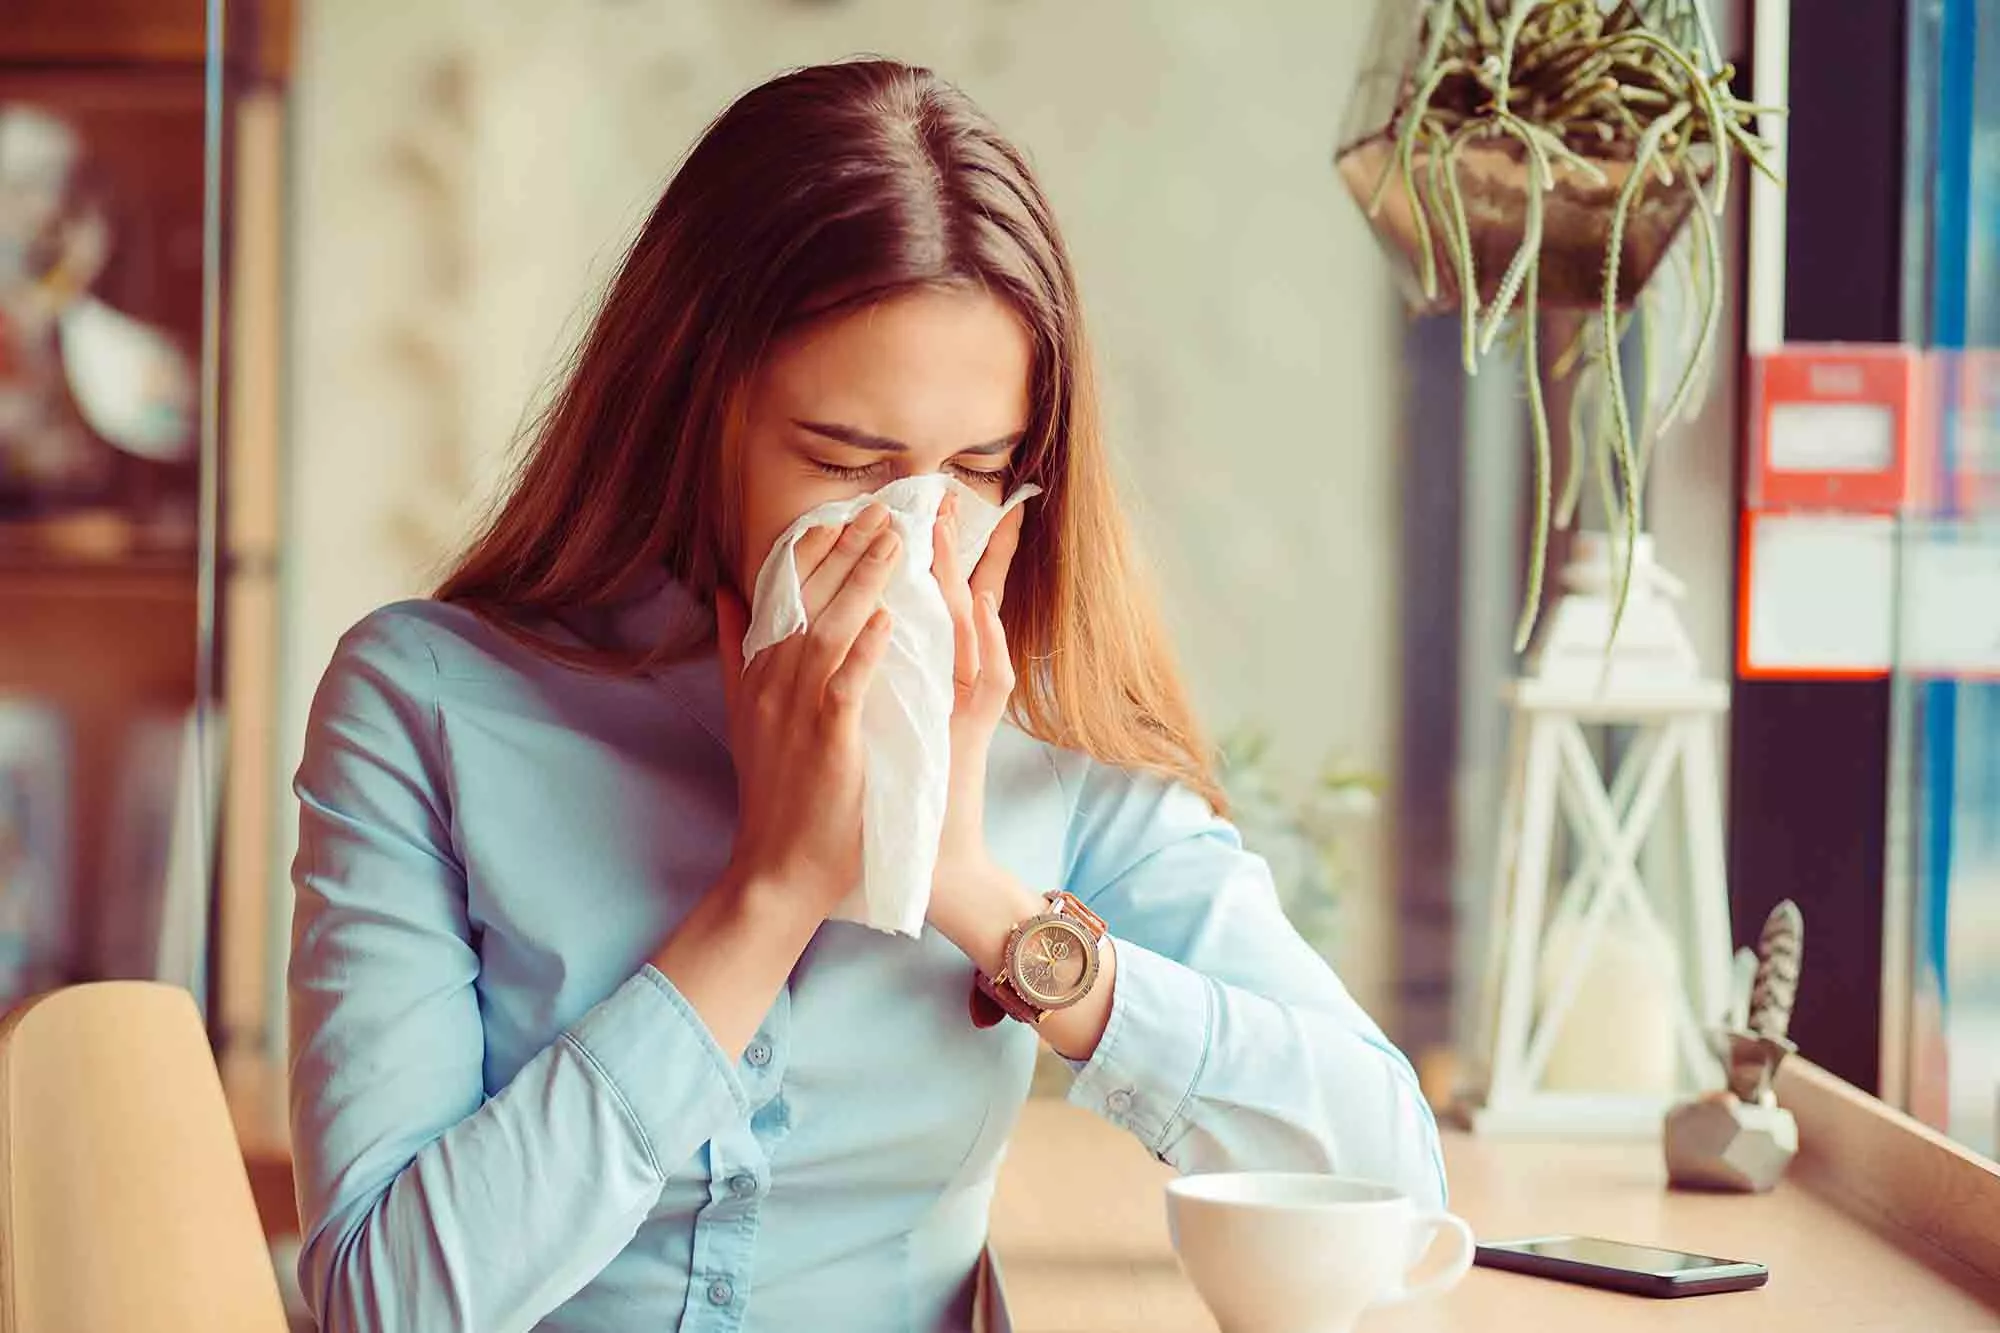 What is Allergy? Why Does It Happen? What are the symptoms?